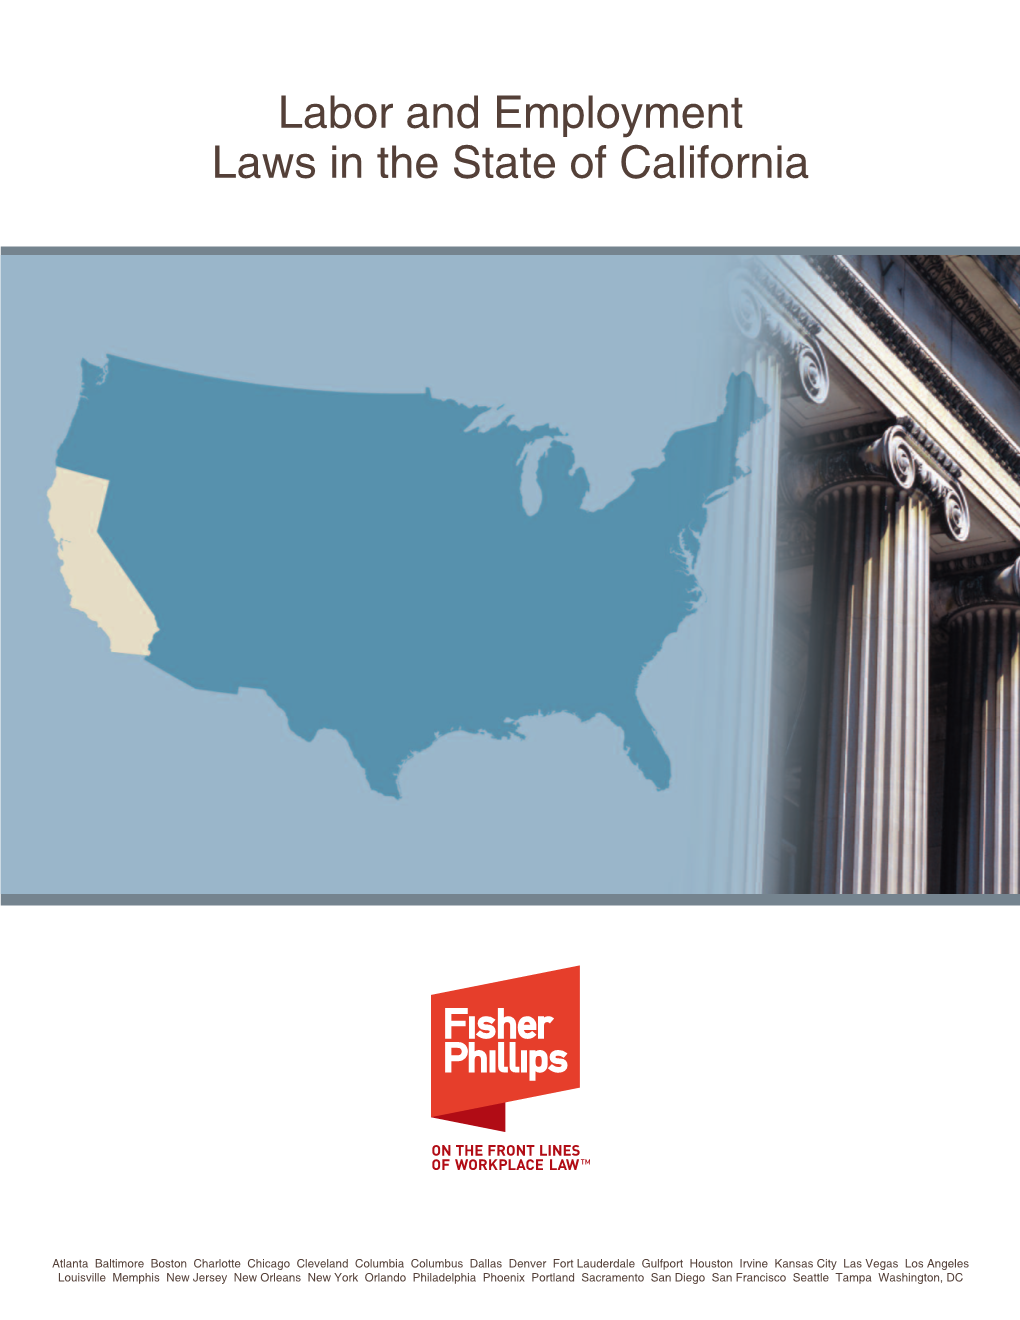 Labor and Employment Laws in the State of California